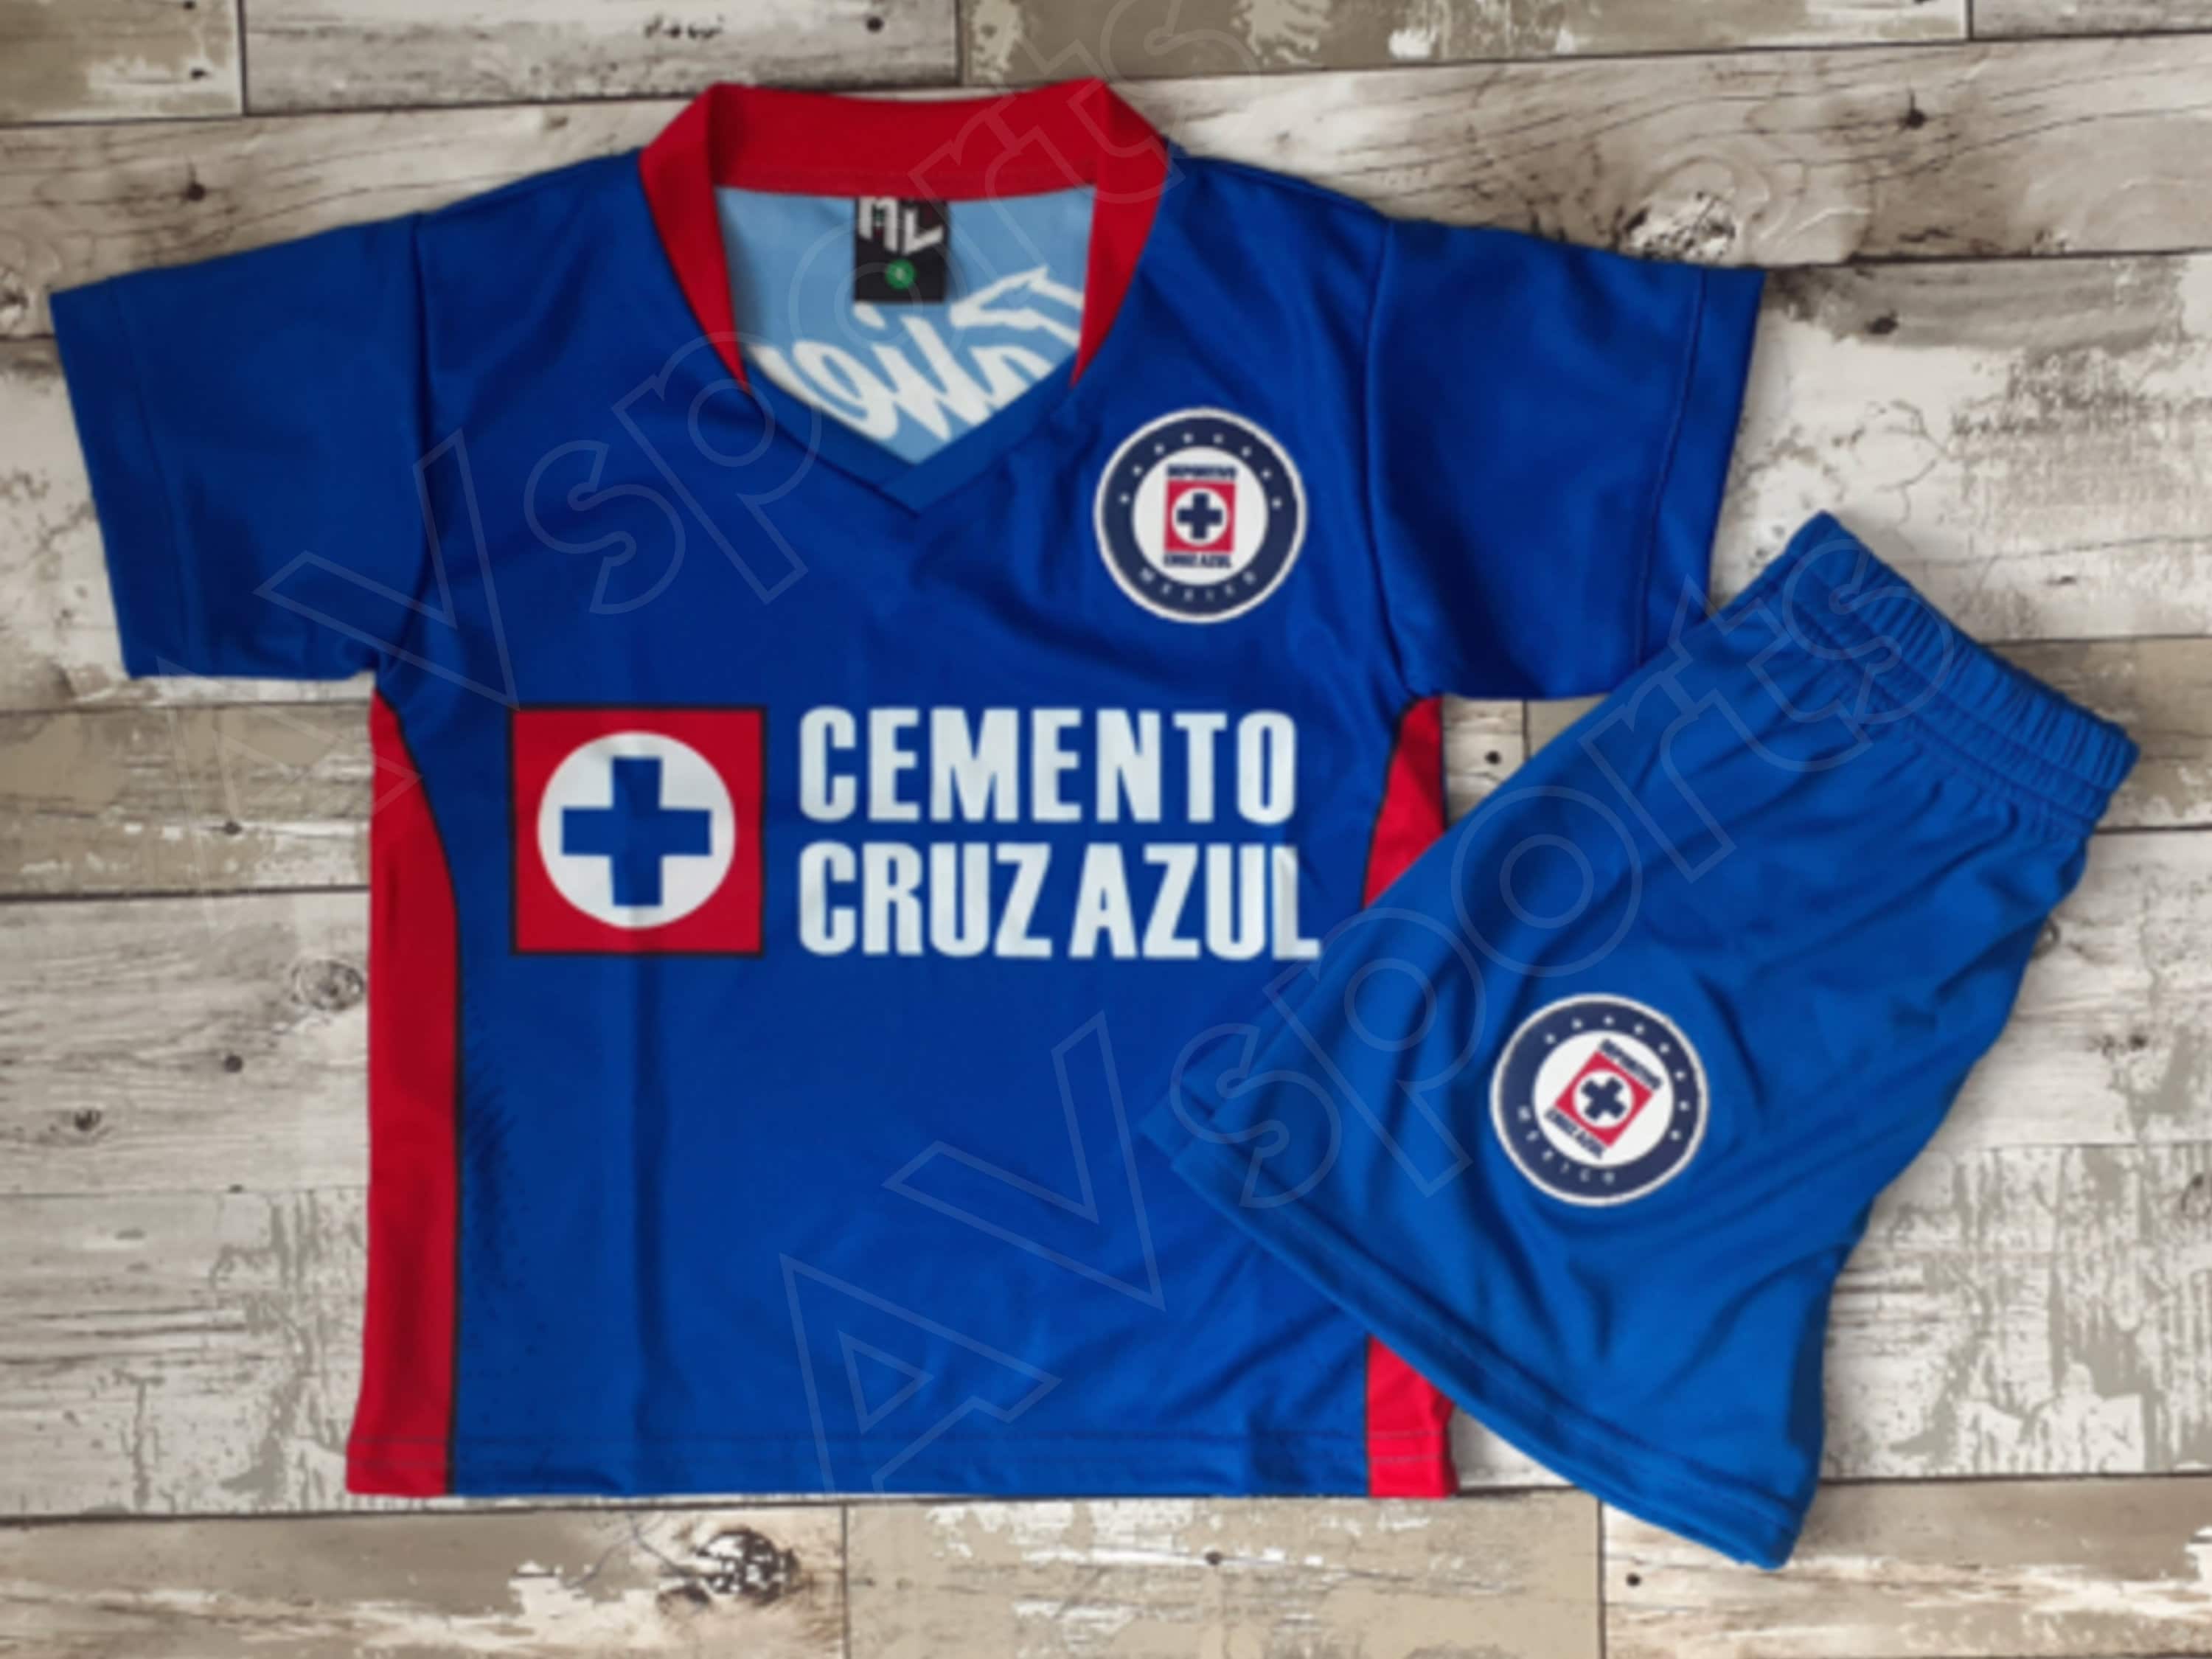 Cruz Azul Kid's jersey and shorts Red Color Futbol Jersey Youth Soccer uniform 